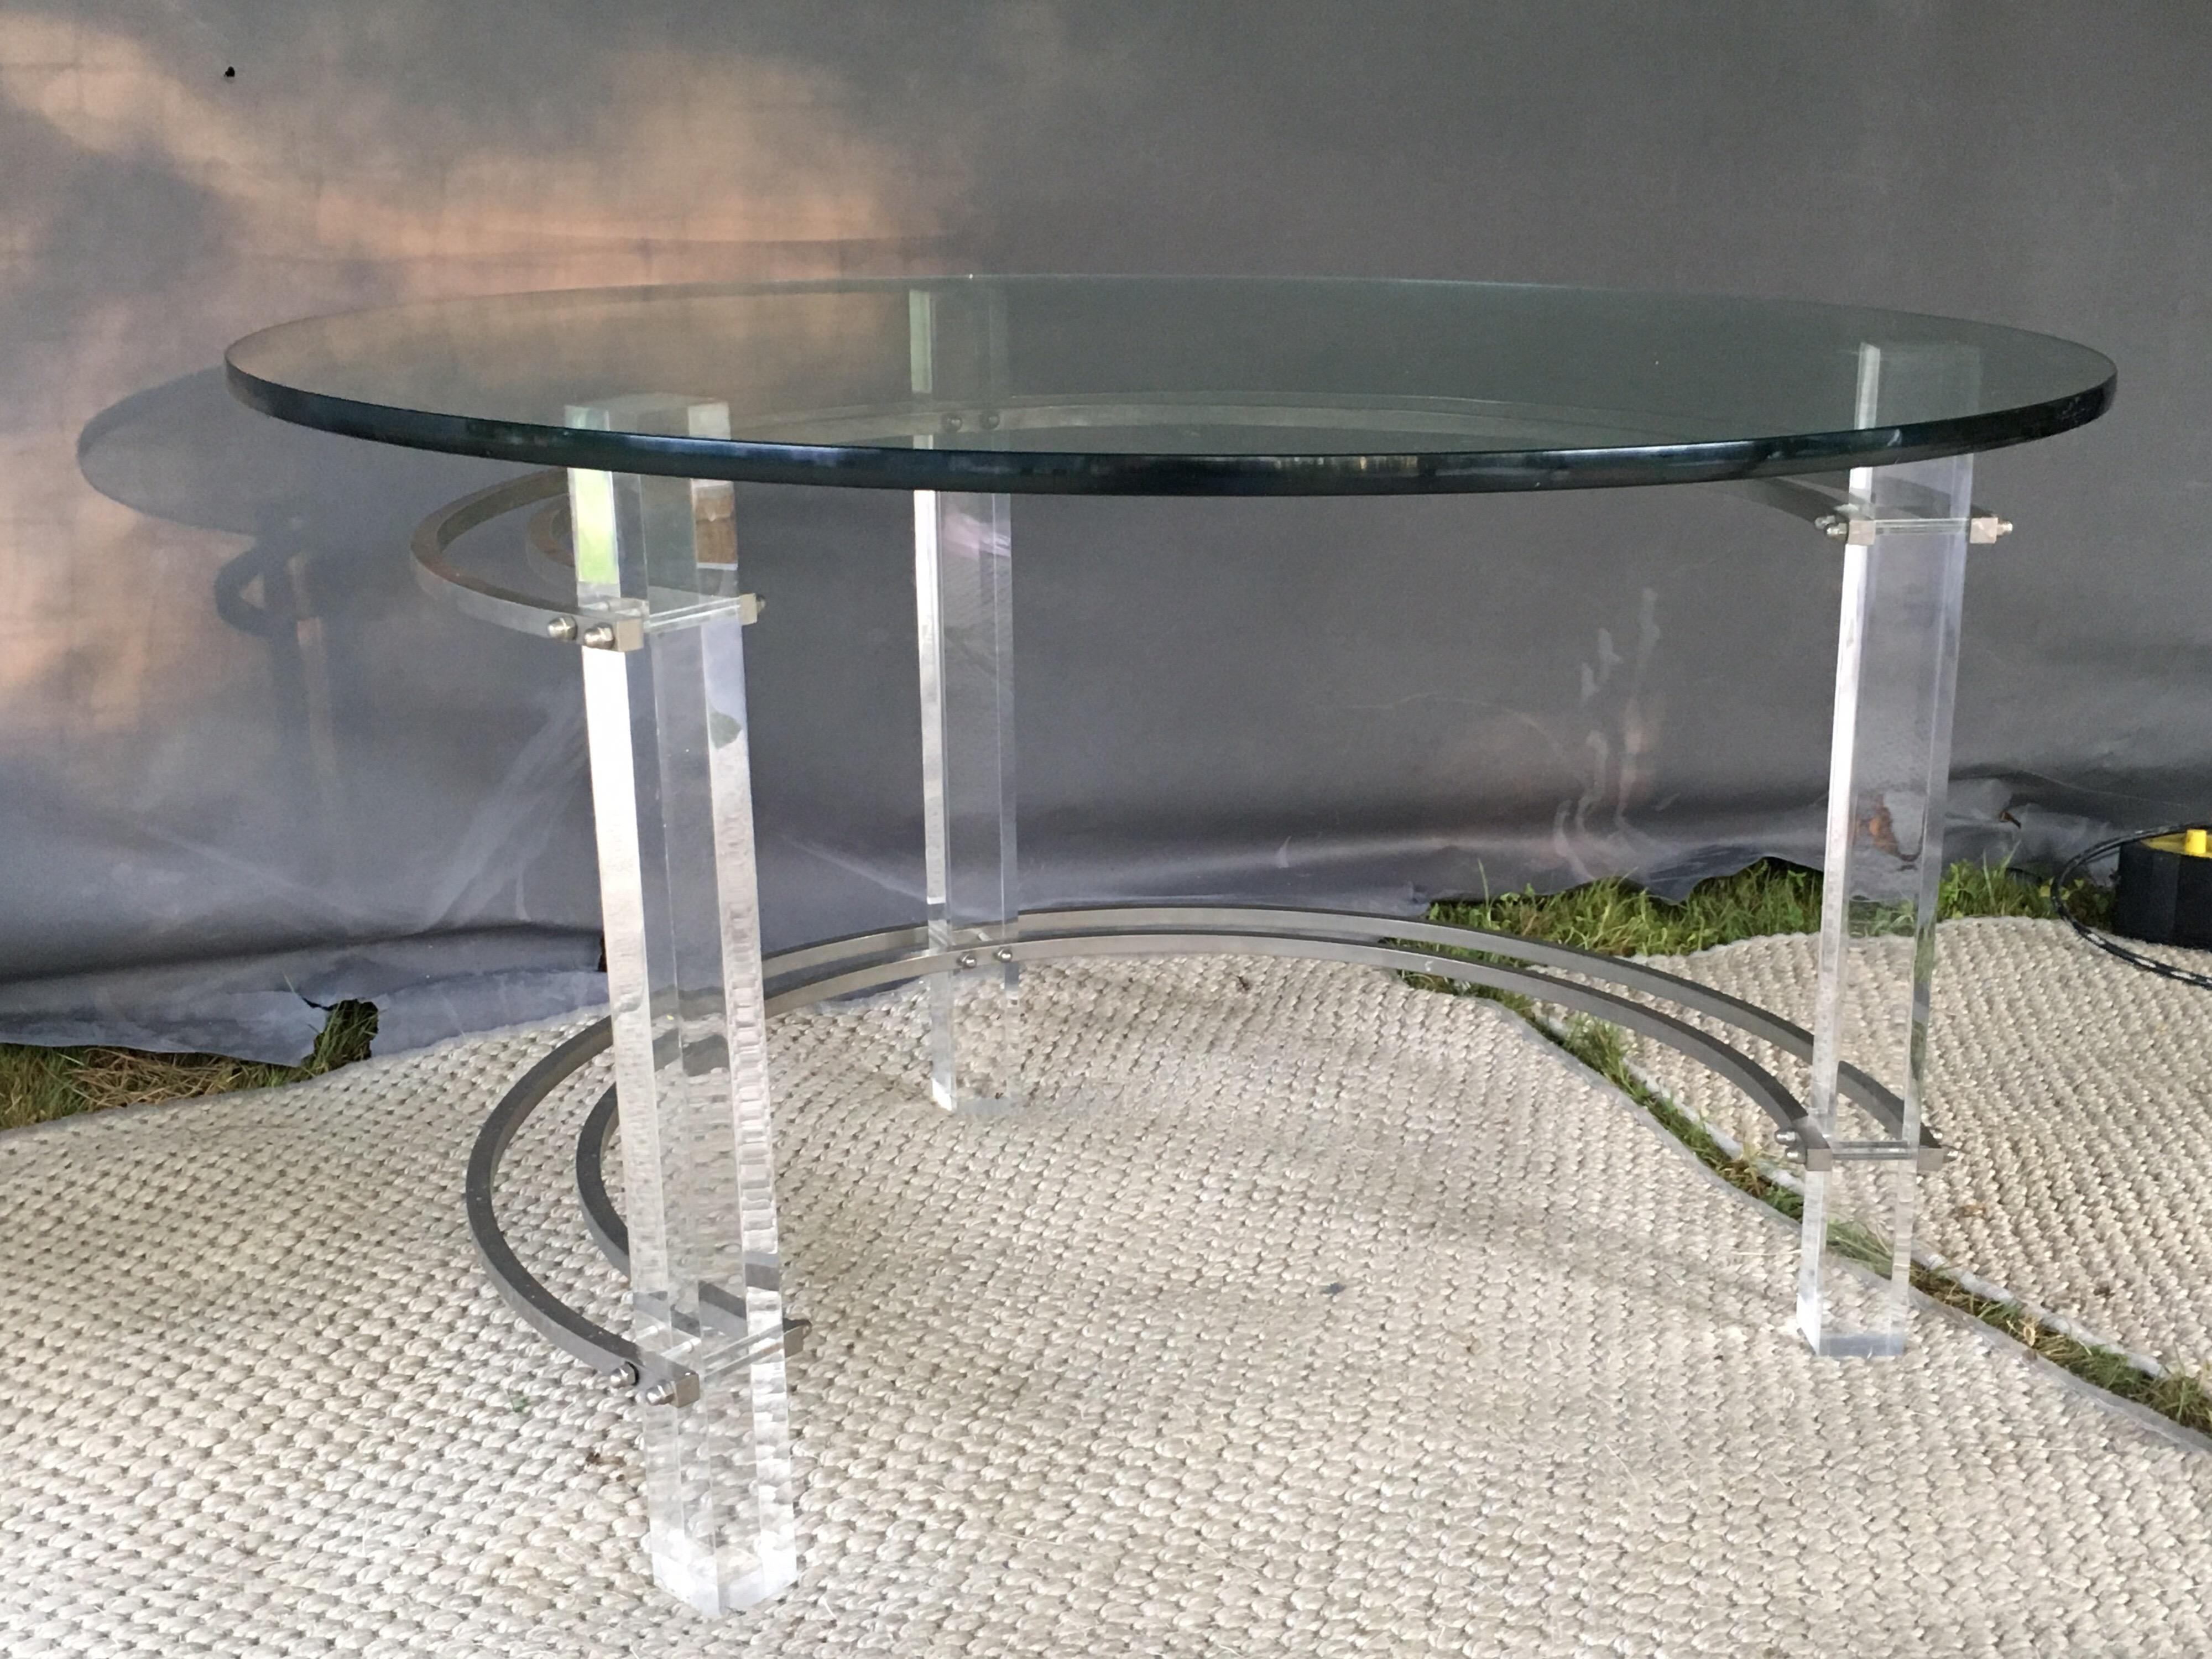 Late 20th century Lucite, chrome and glass coffee table by Charles Hollis Jones
Measures: Base: 32